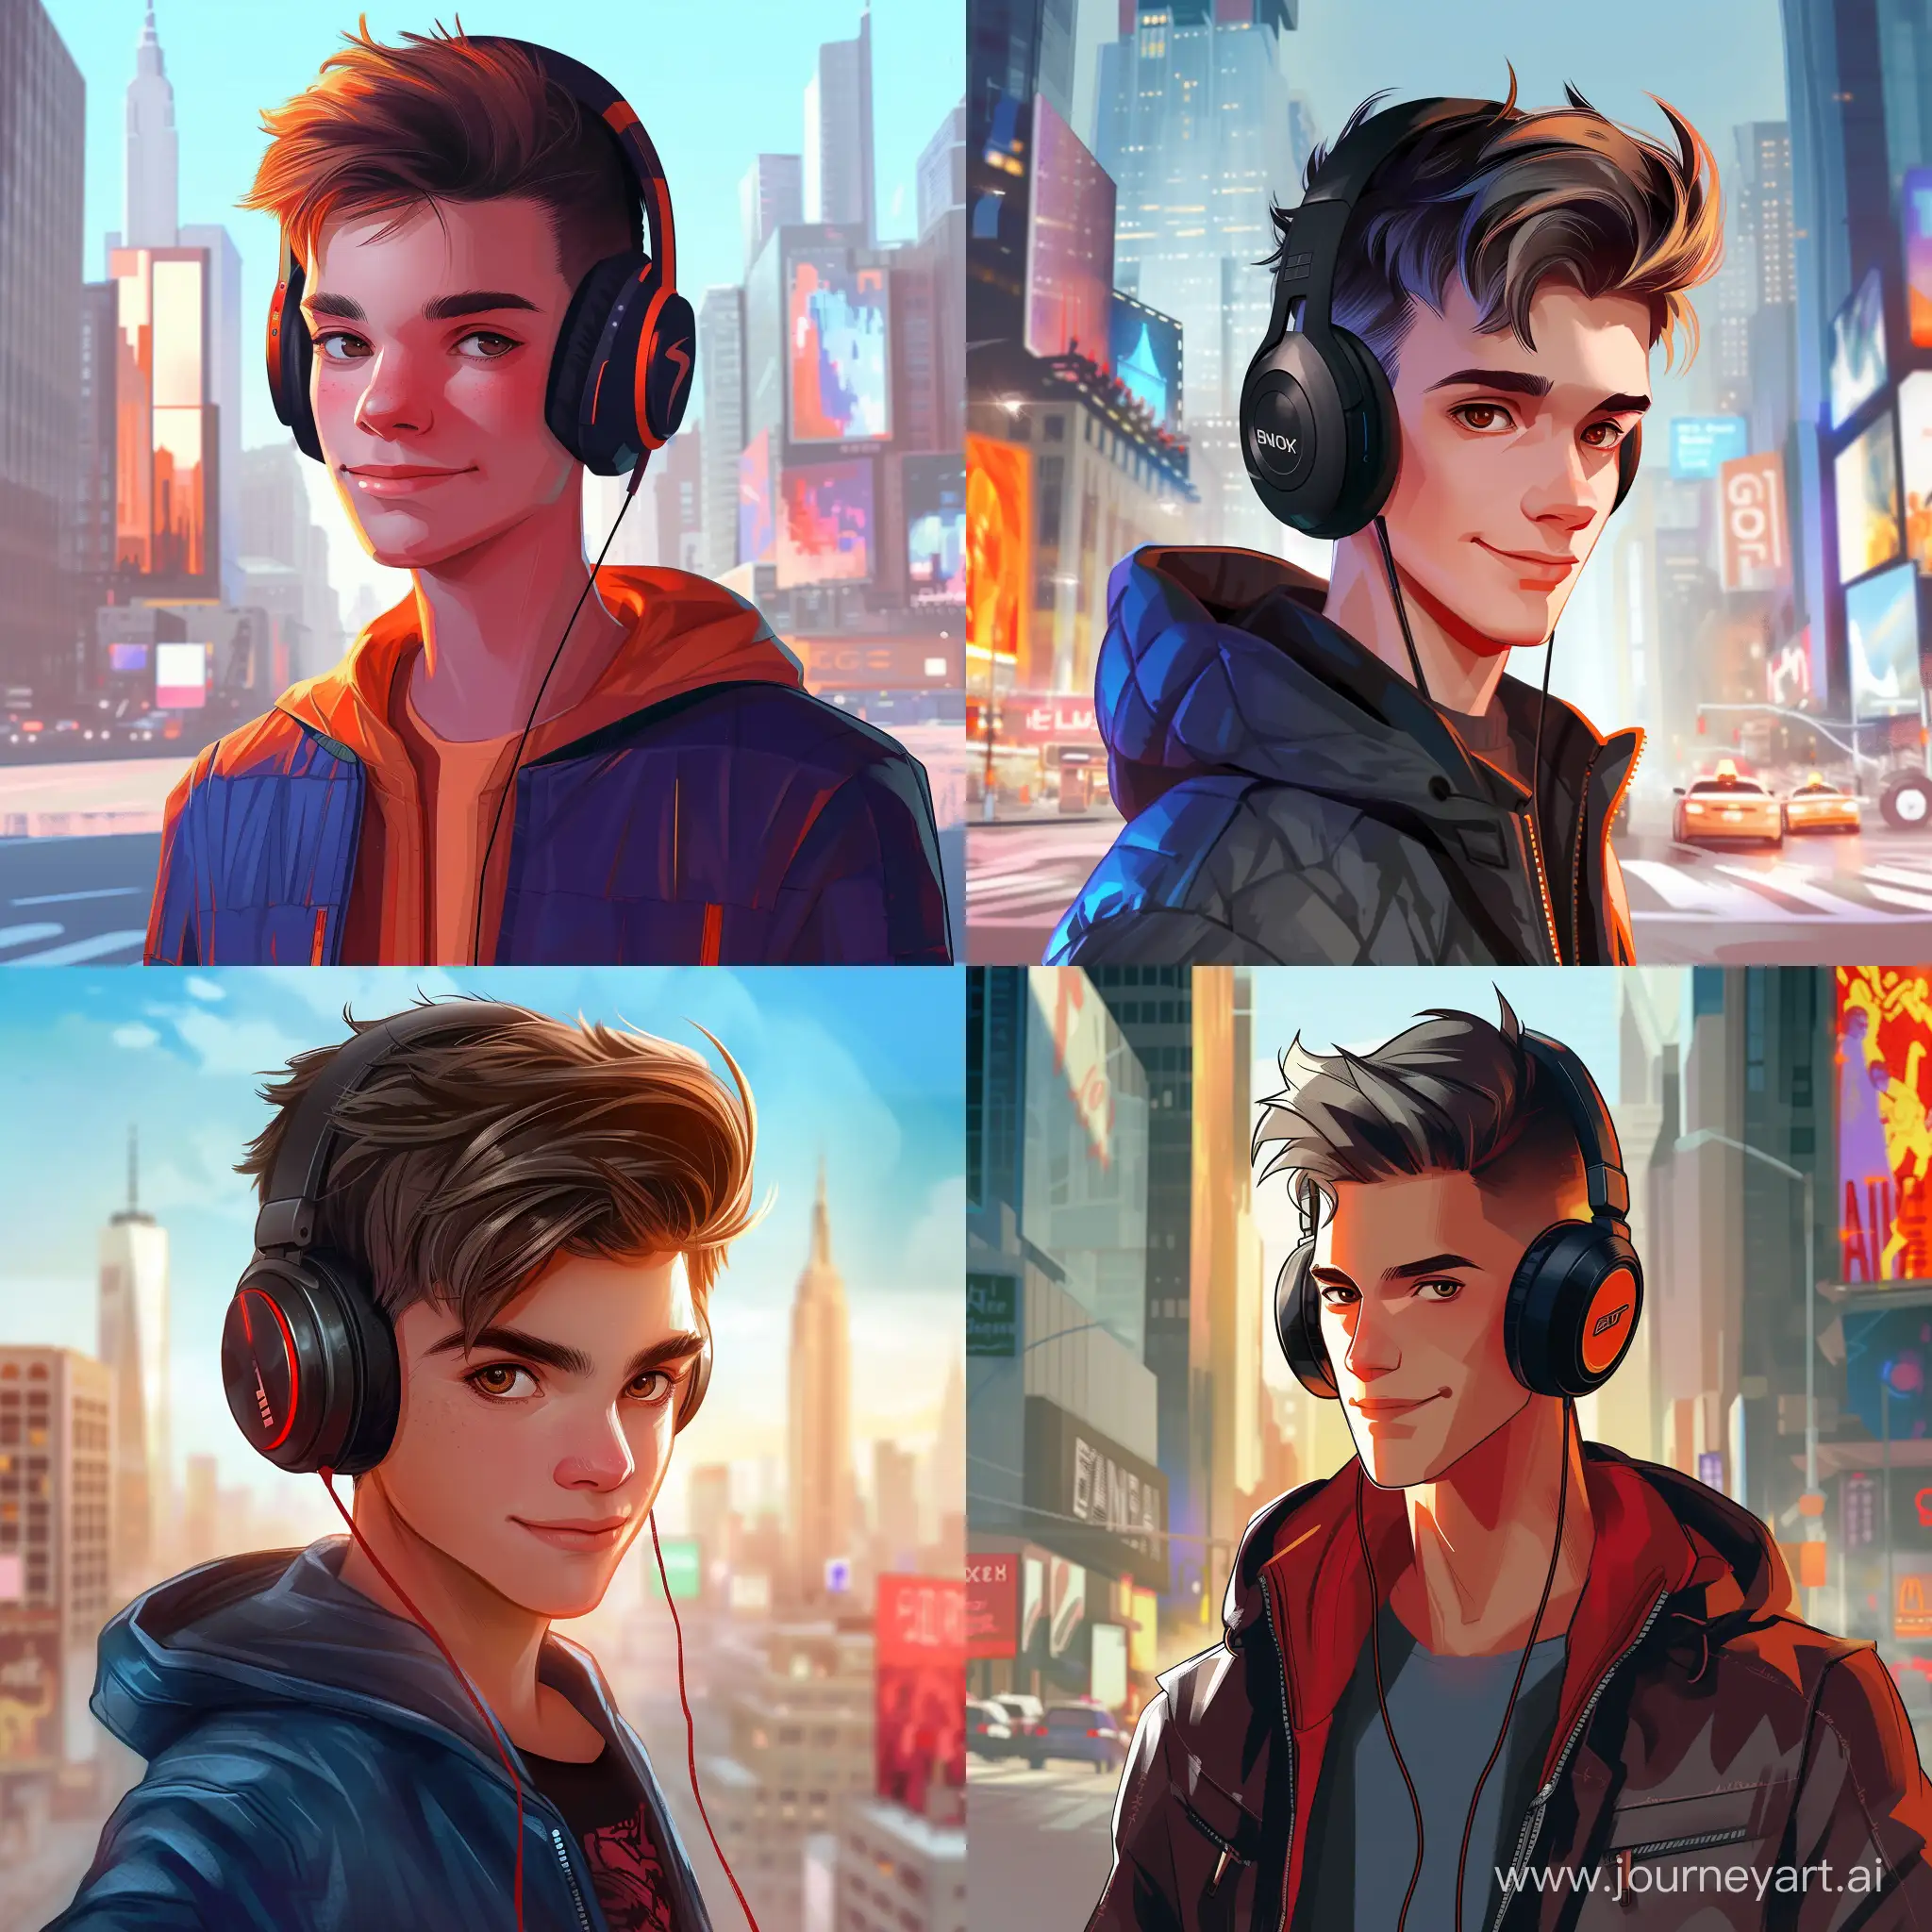 Urban-Explorer-with-Short-Hair-and-Headphones-in-DisneyInspired-Cityscape